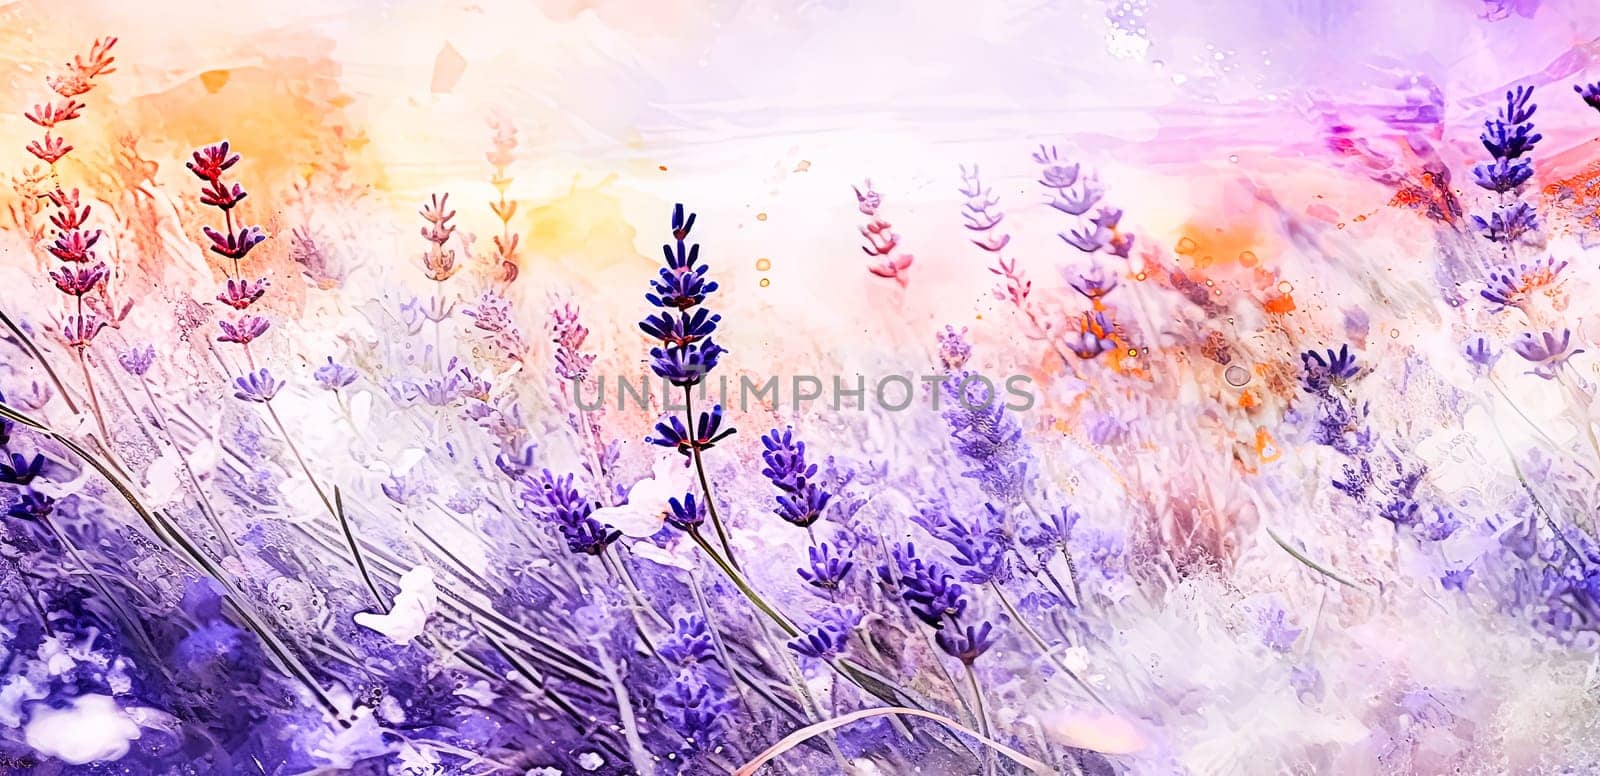 Vintage style watercolor illustration of lavender flowers isolated on a white background. Elegant depiction perfect for various design purposes.